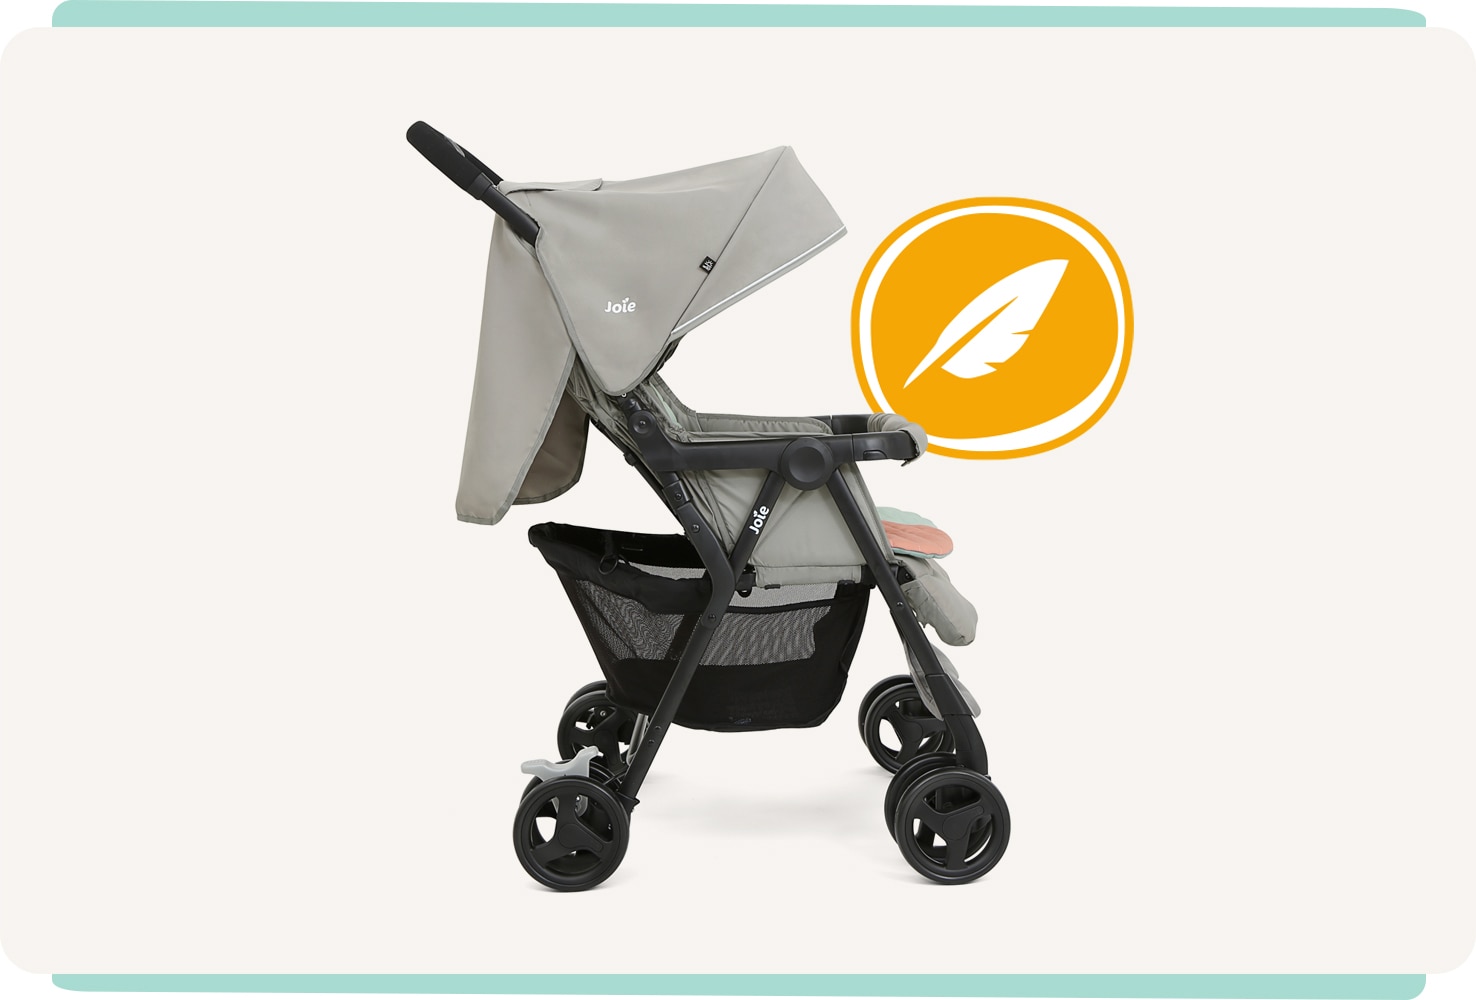  The Joie Aire Twin double stroller in light gray, in profile facing to the right, sitting next to an orange circle with a white outline and a white feather icon inside.